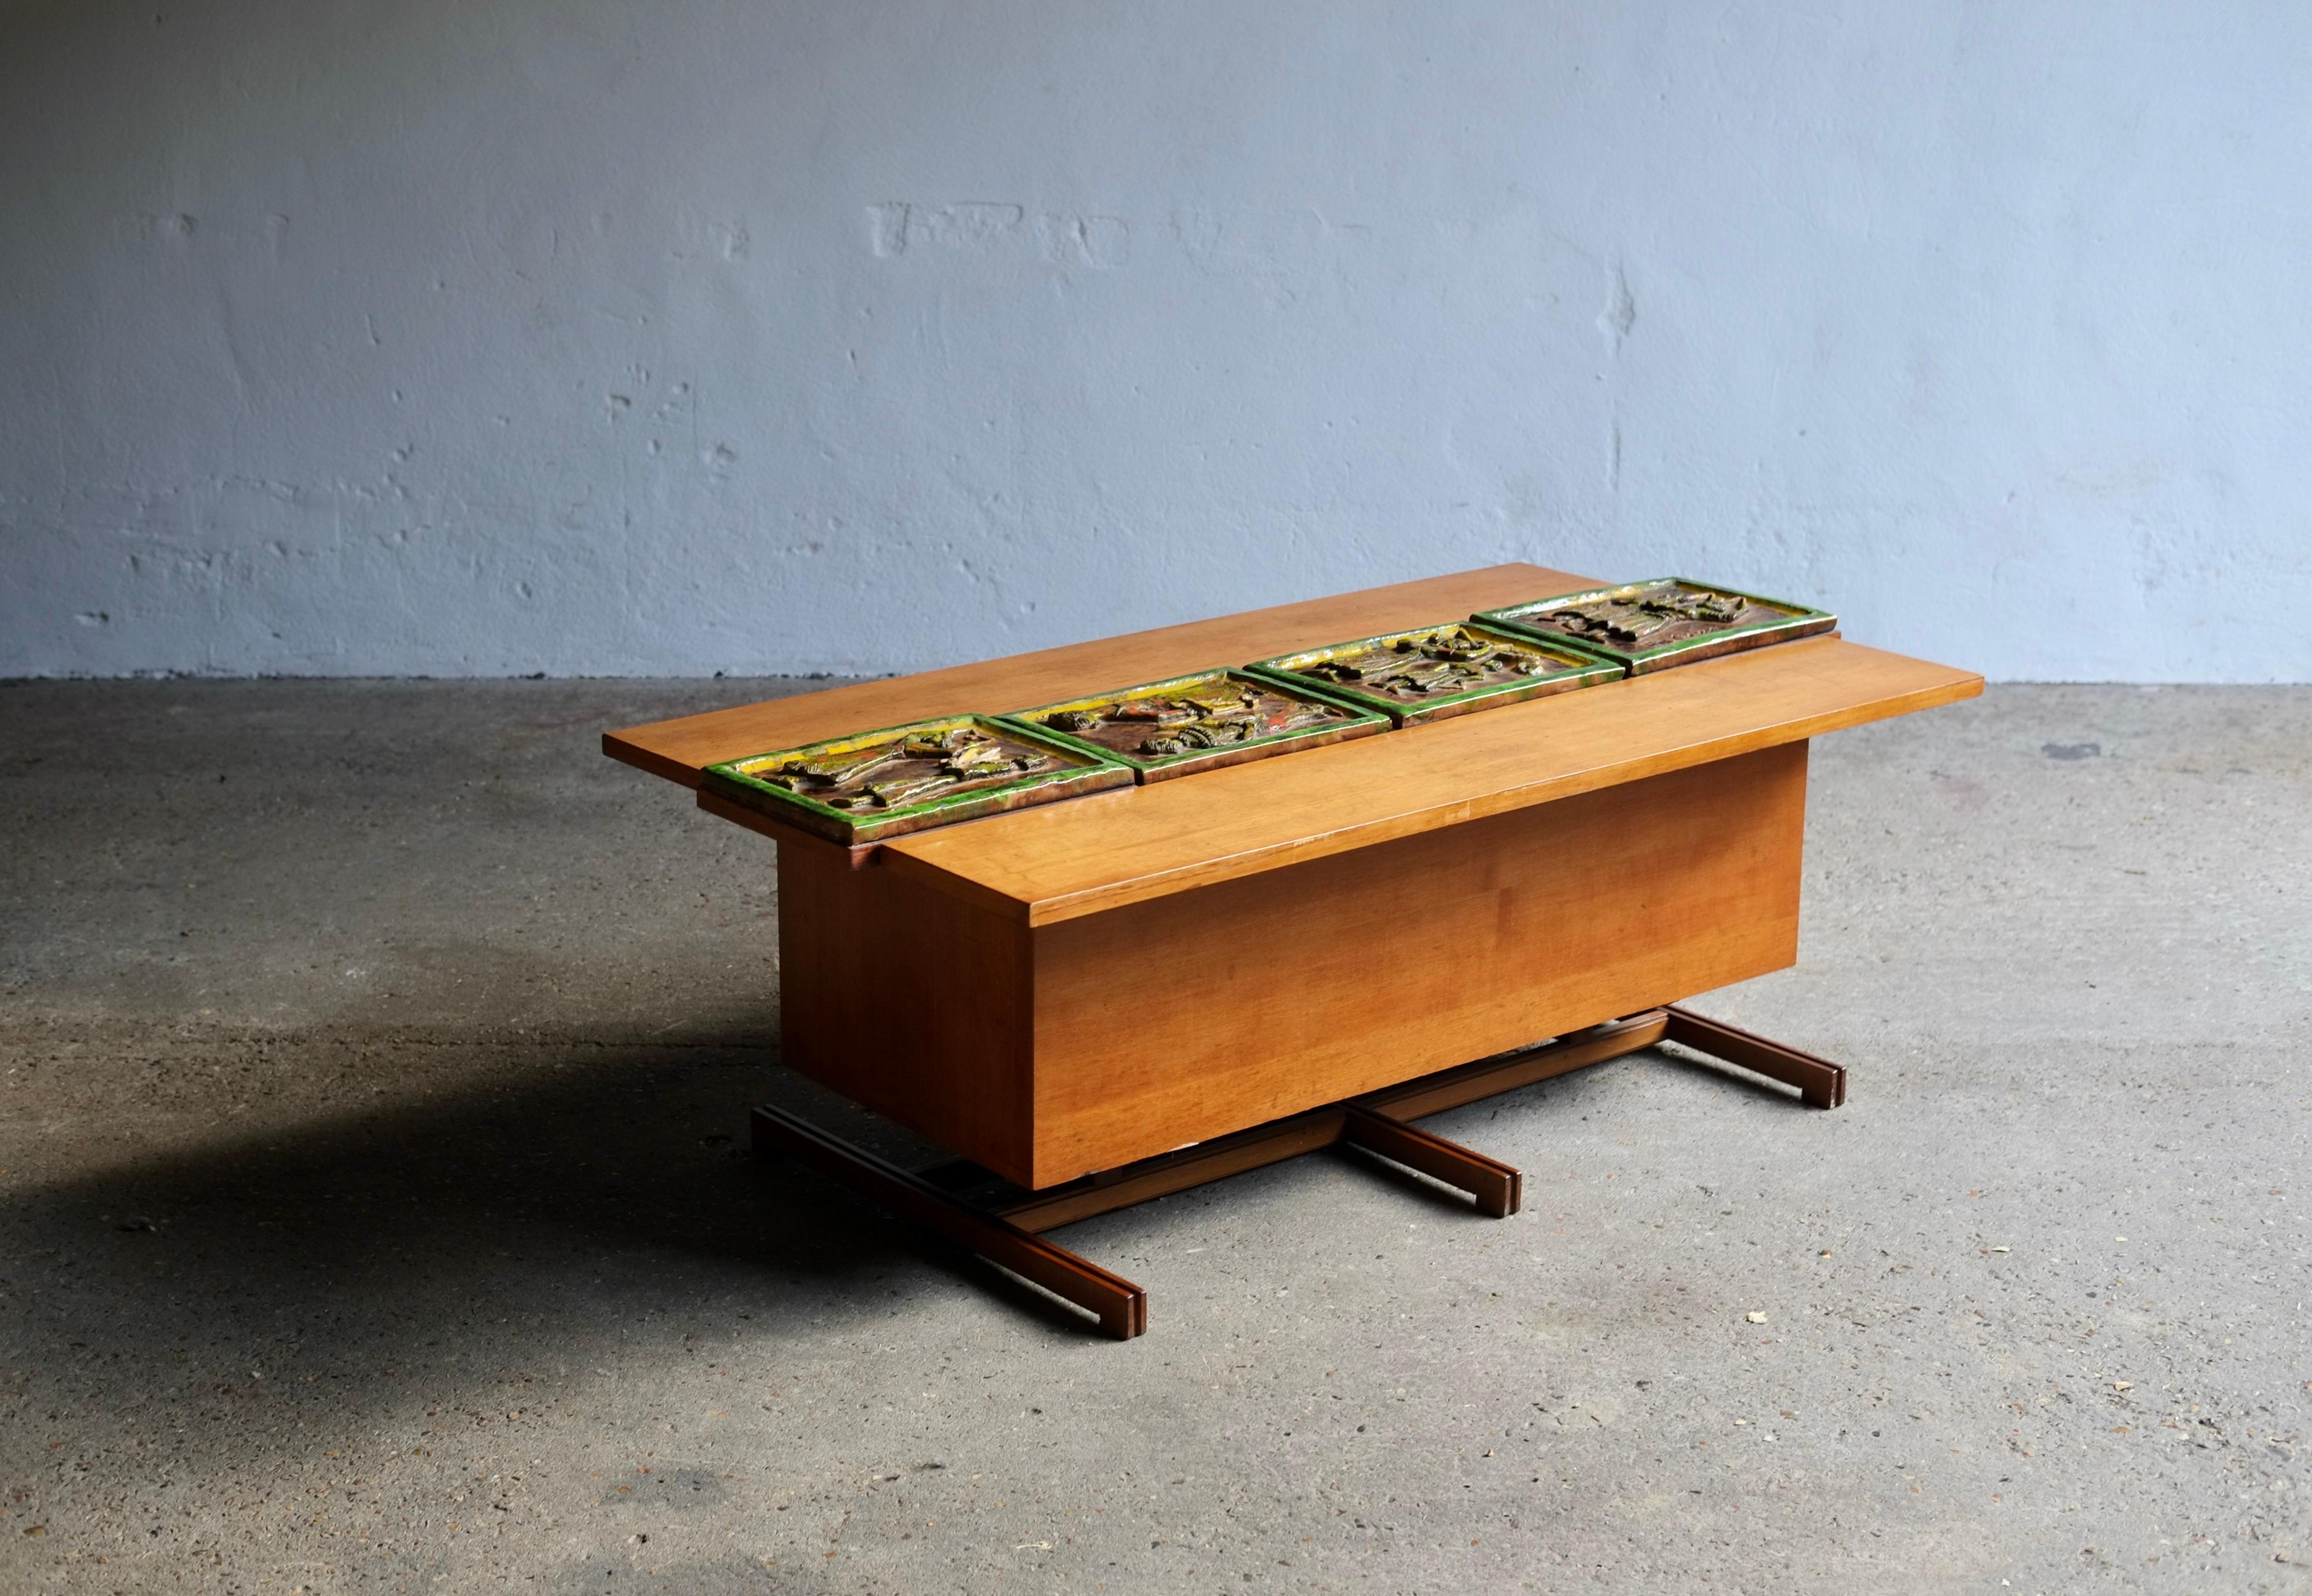 A bespoke wooden midcentury Italian coffee table featuring large signed ceramic tiles which adjust to reveal a cocktail compartment within.